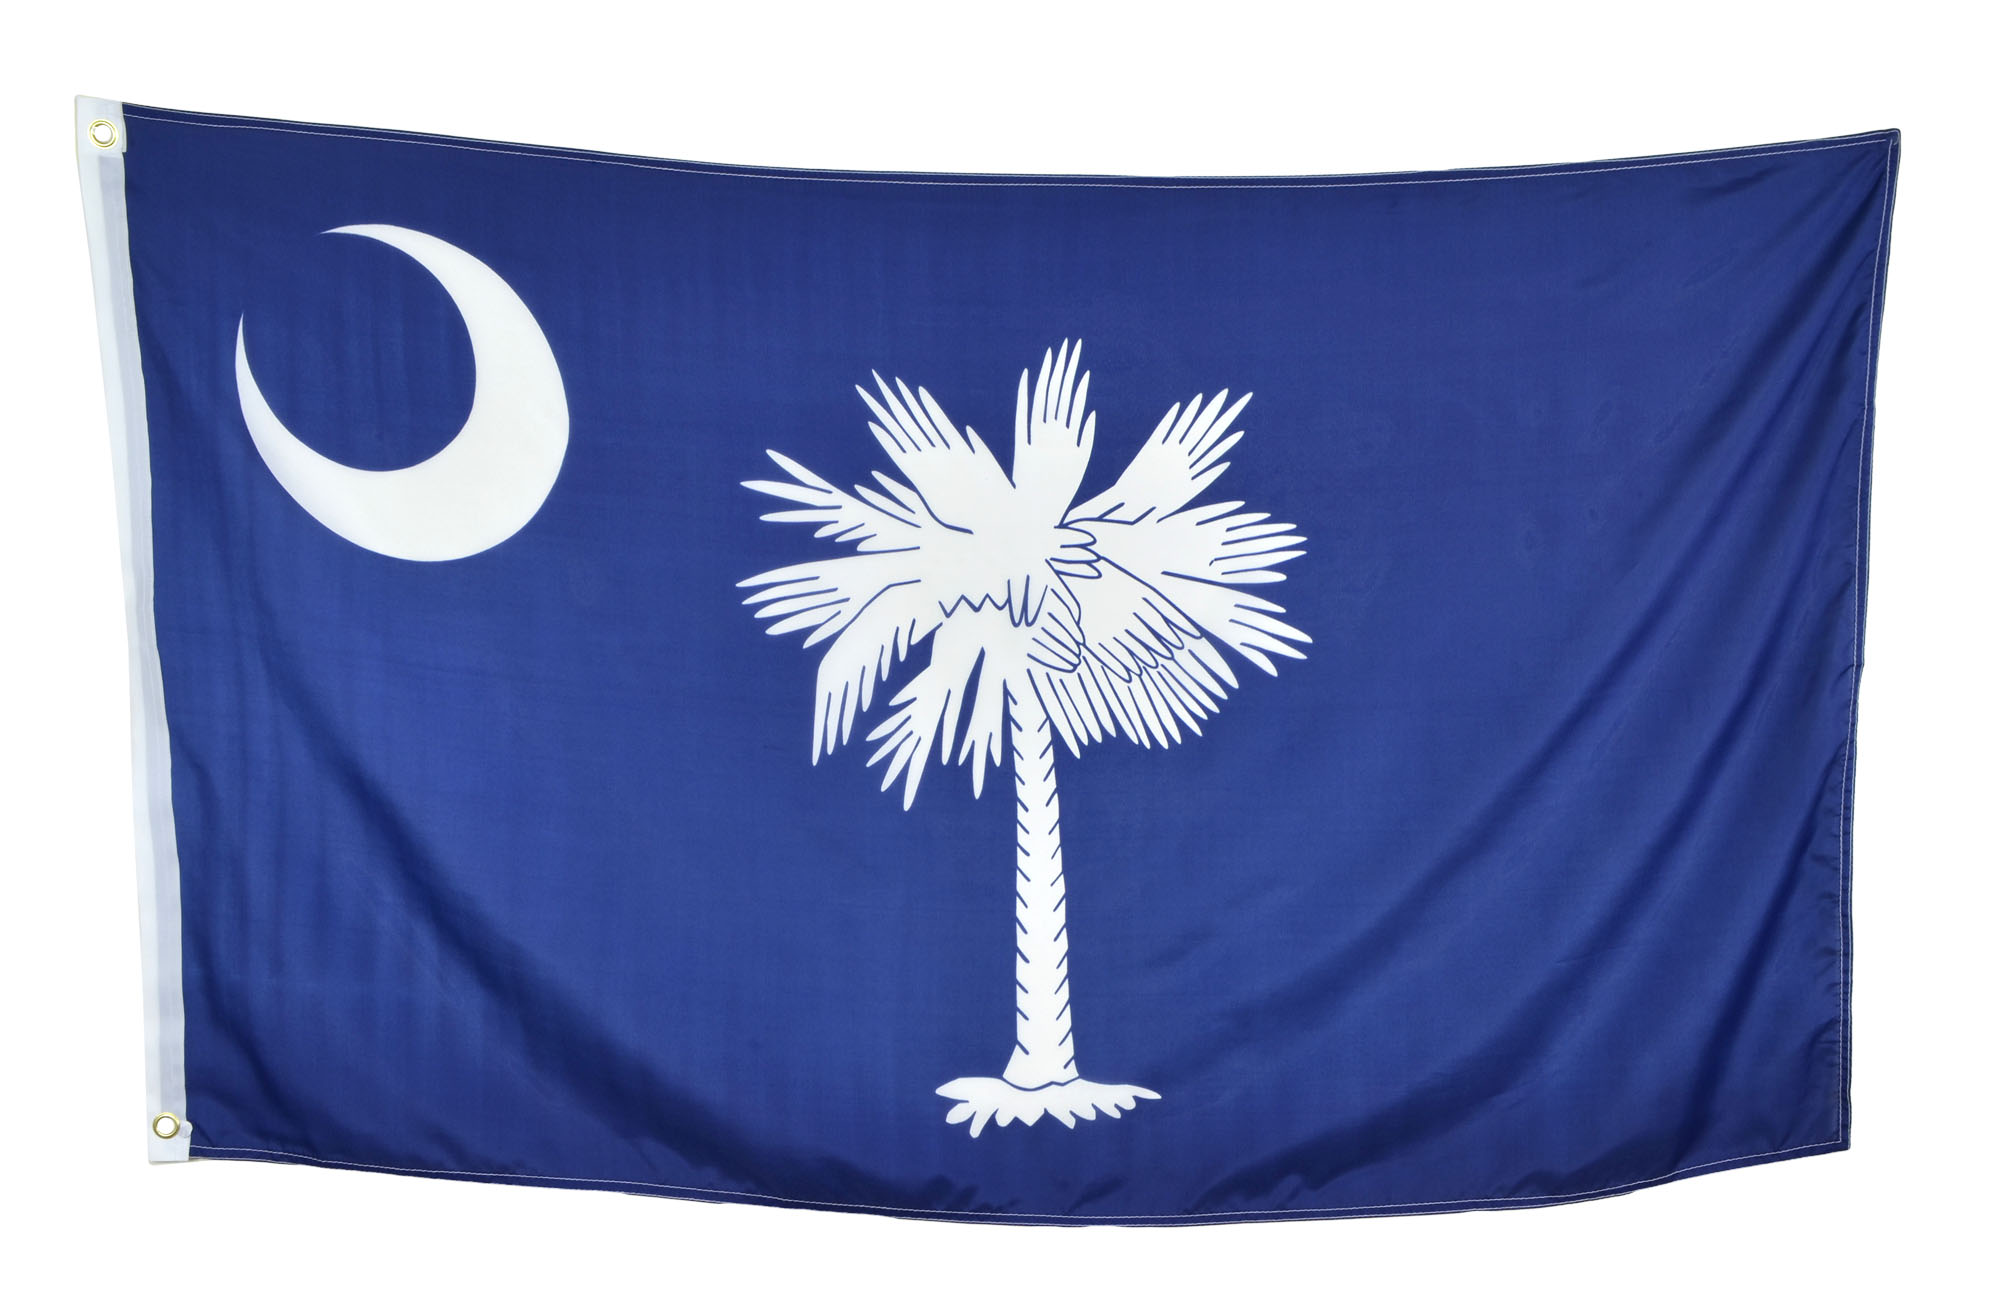 Shop72 US South Carolina State Flags - South Carolina Flag - 3x5' Flag from Sturdy 100D Polyester - Canvas Header Brass Grommets Double Stitched from